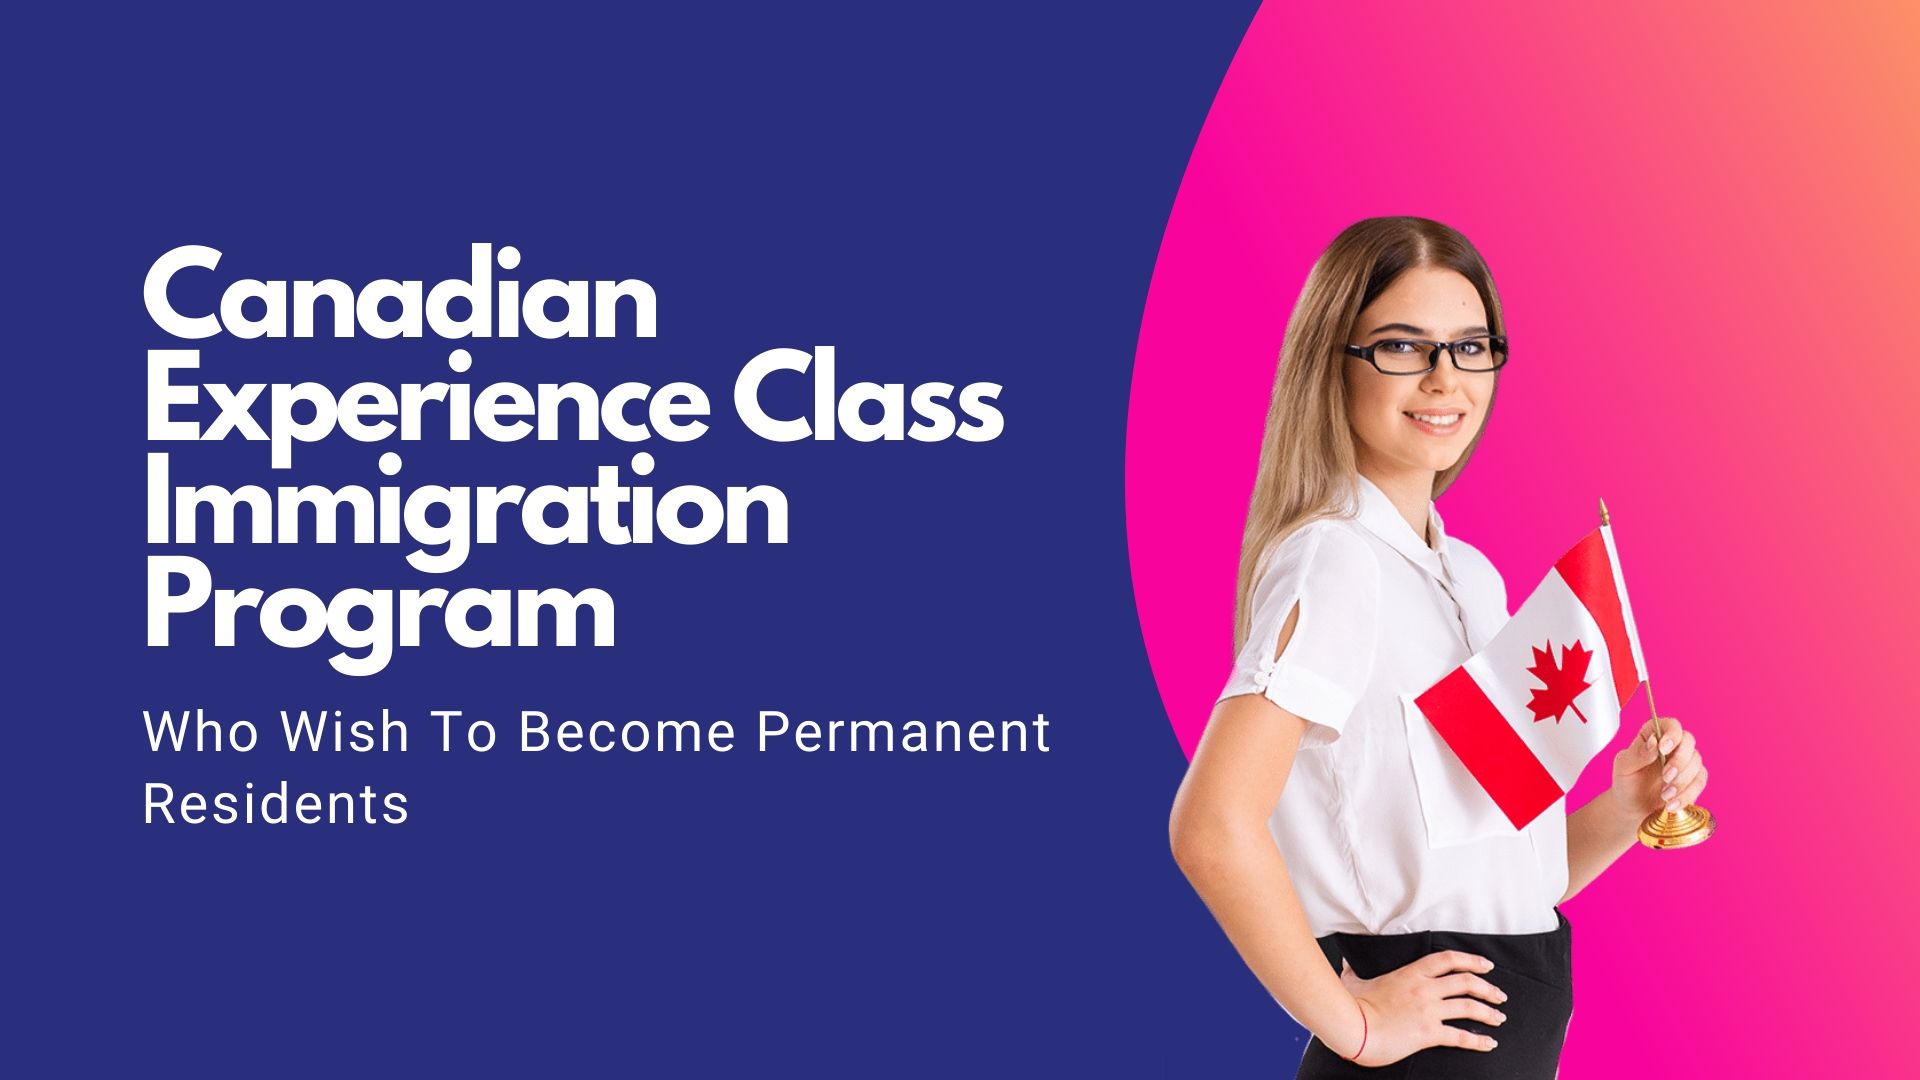 Canadian Experience Class Immigration Program Who Wish To Become Permanent Residents